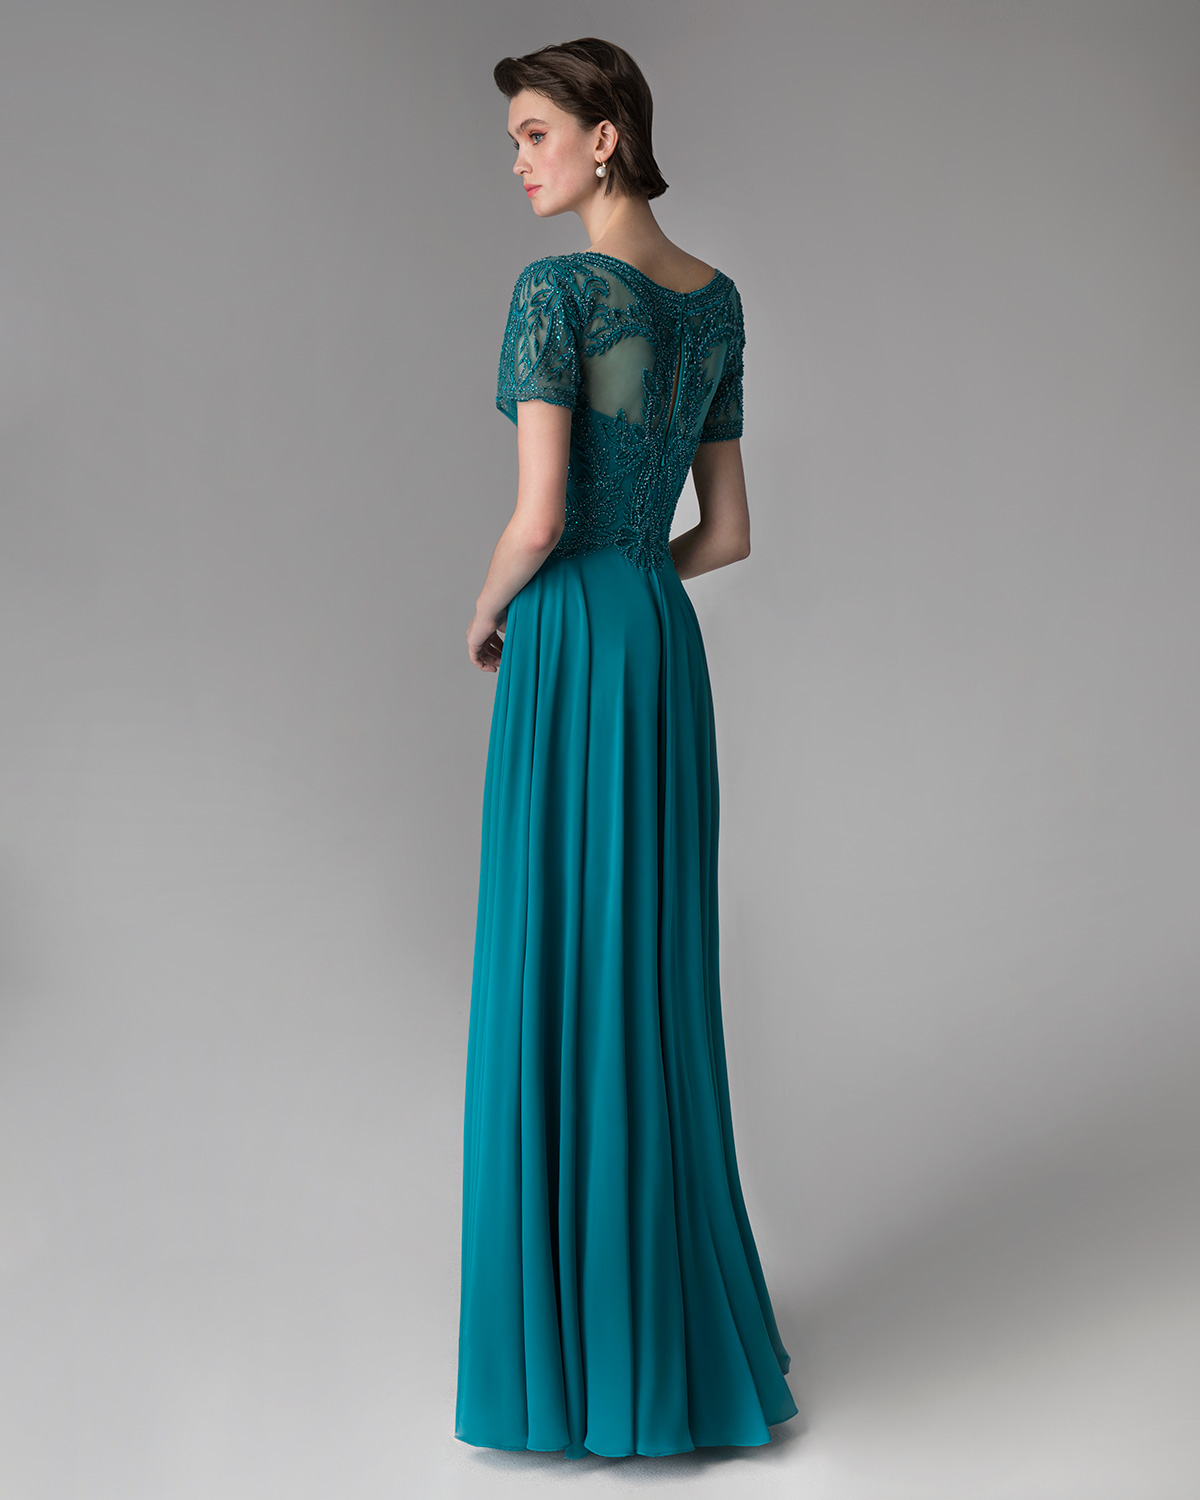 Классические платья / Long evening dress for the mother of the bride with fully beaded top and short sleeves